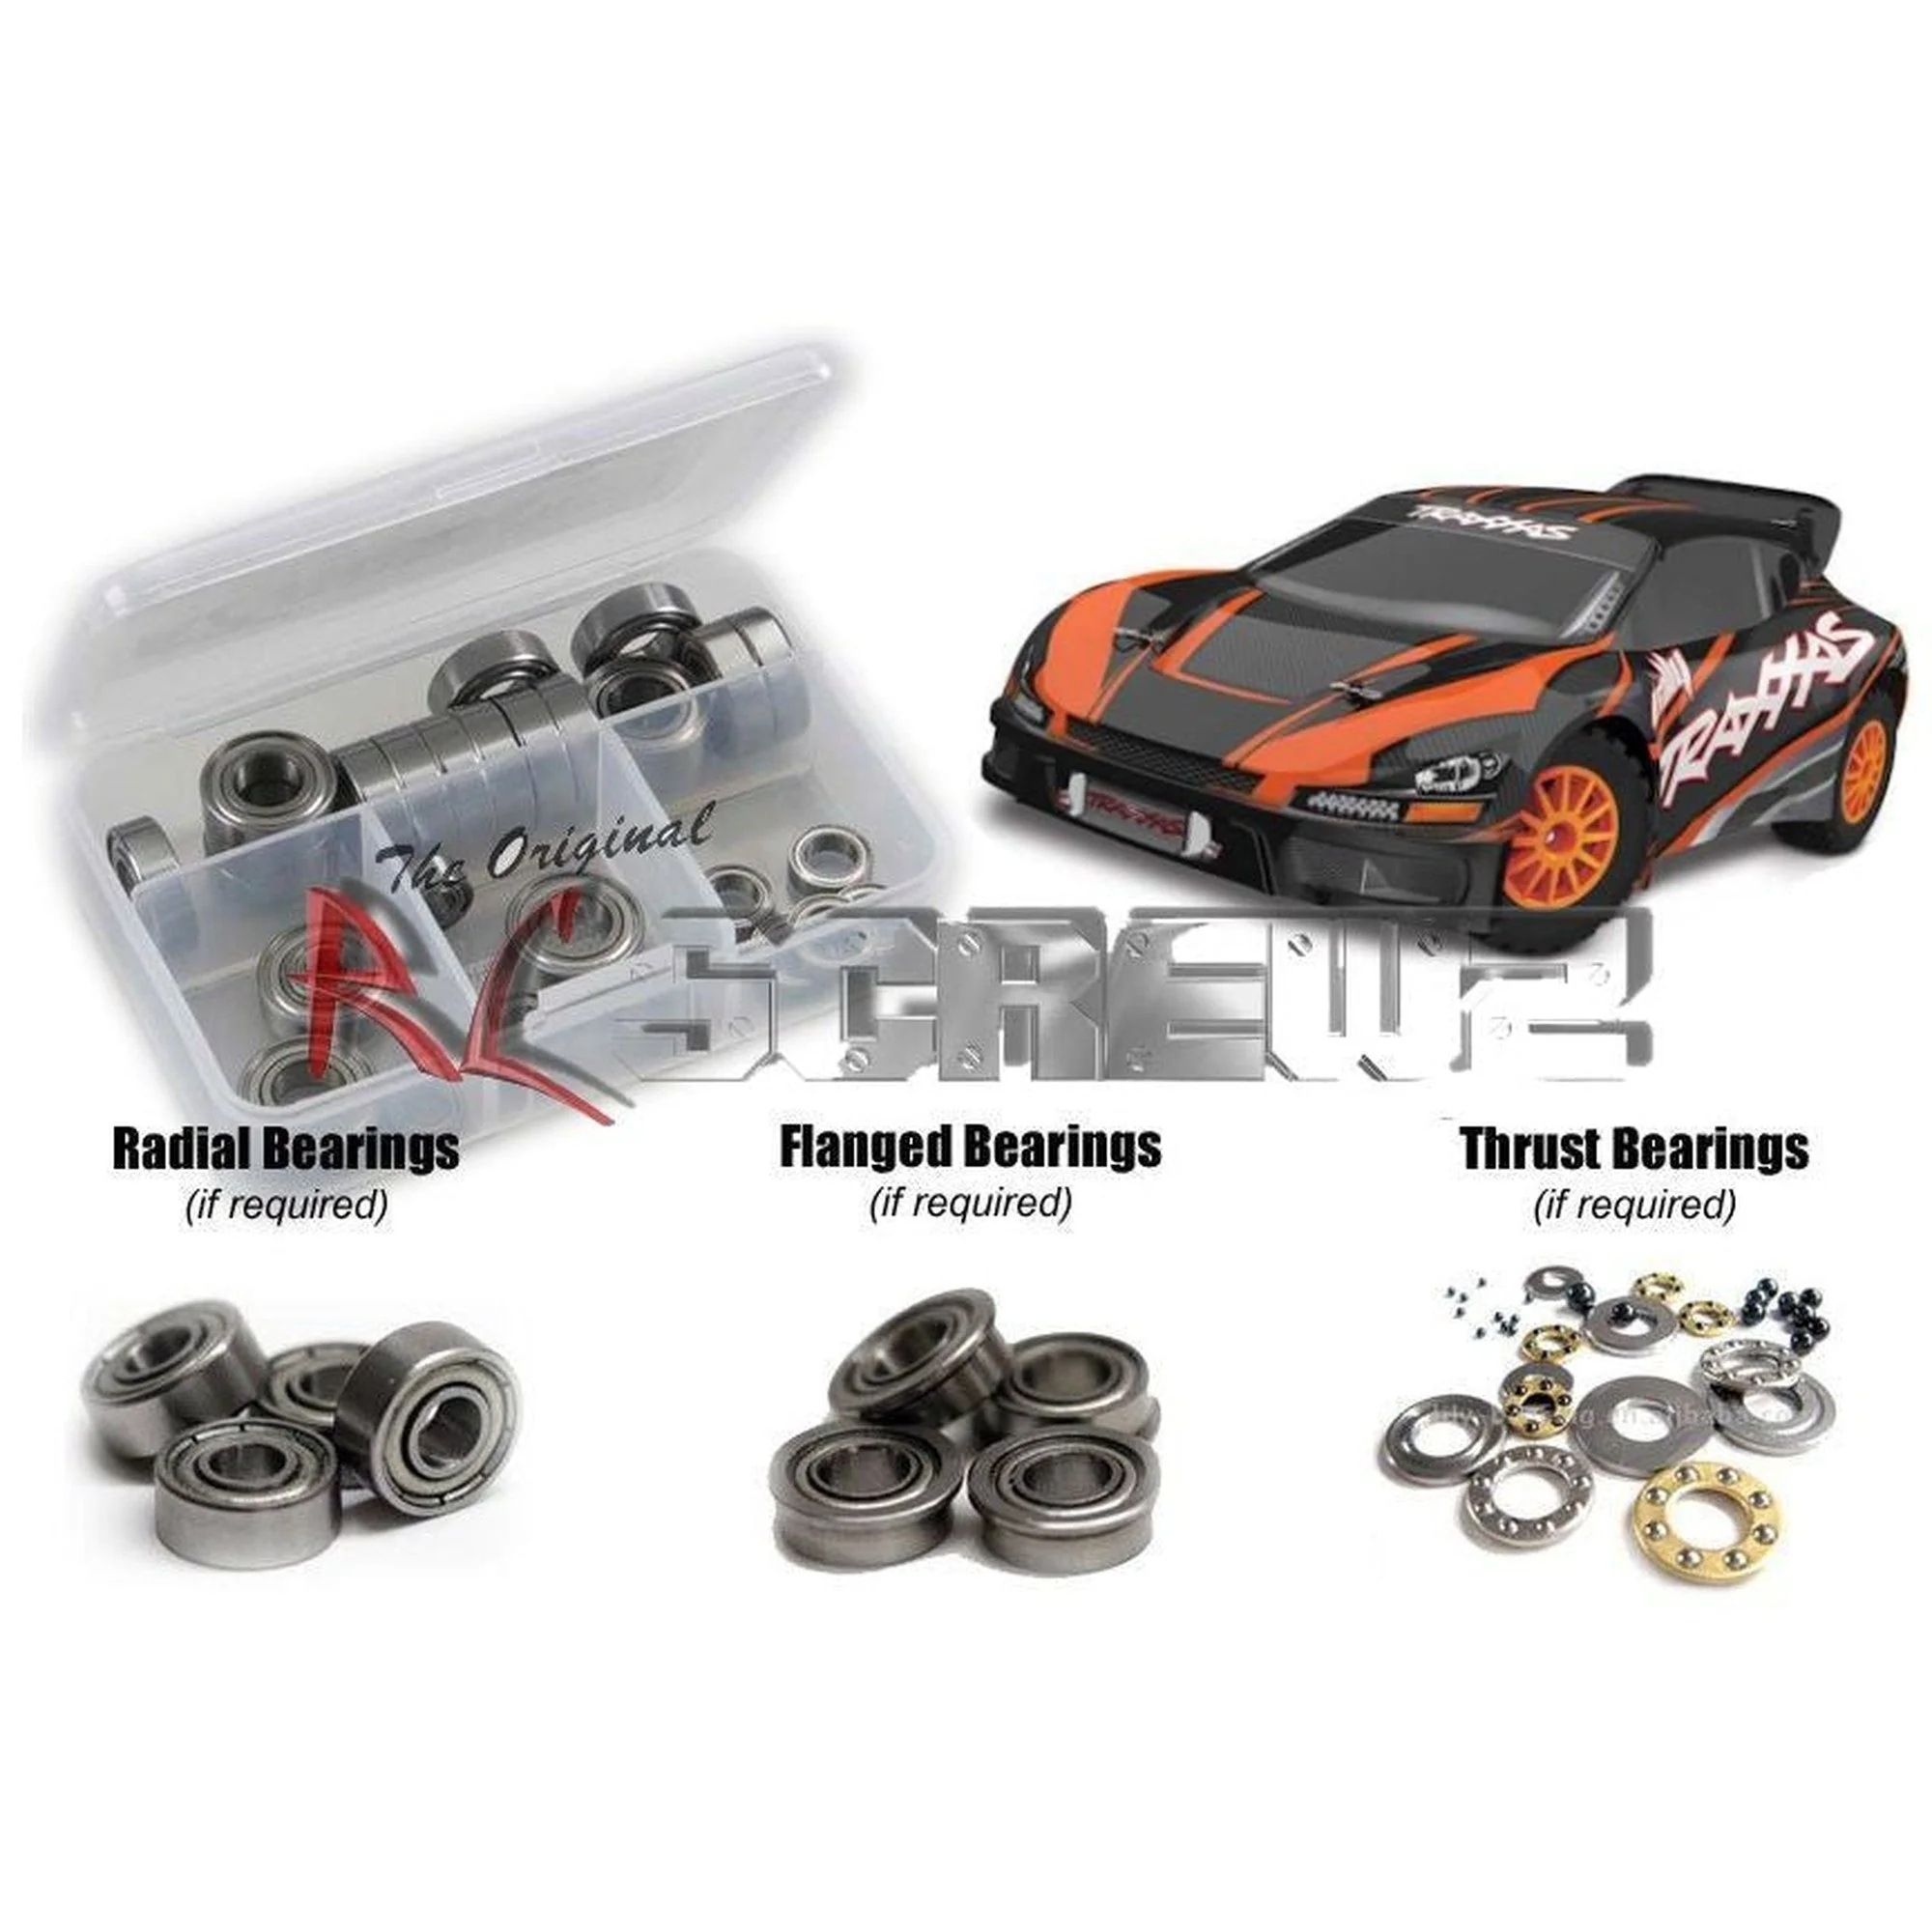 RCScrewZ Metal Shielded Bearing Kit tra072b for Traxxas Rally VXL TSM #74076-3 - Picture 1 of 12